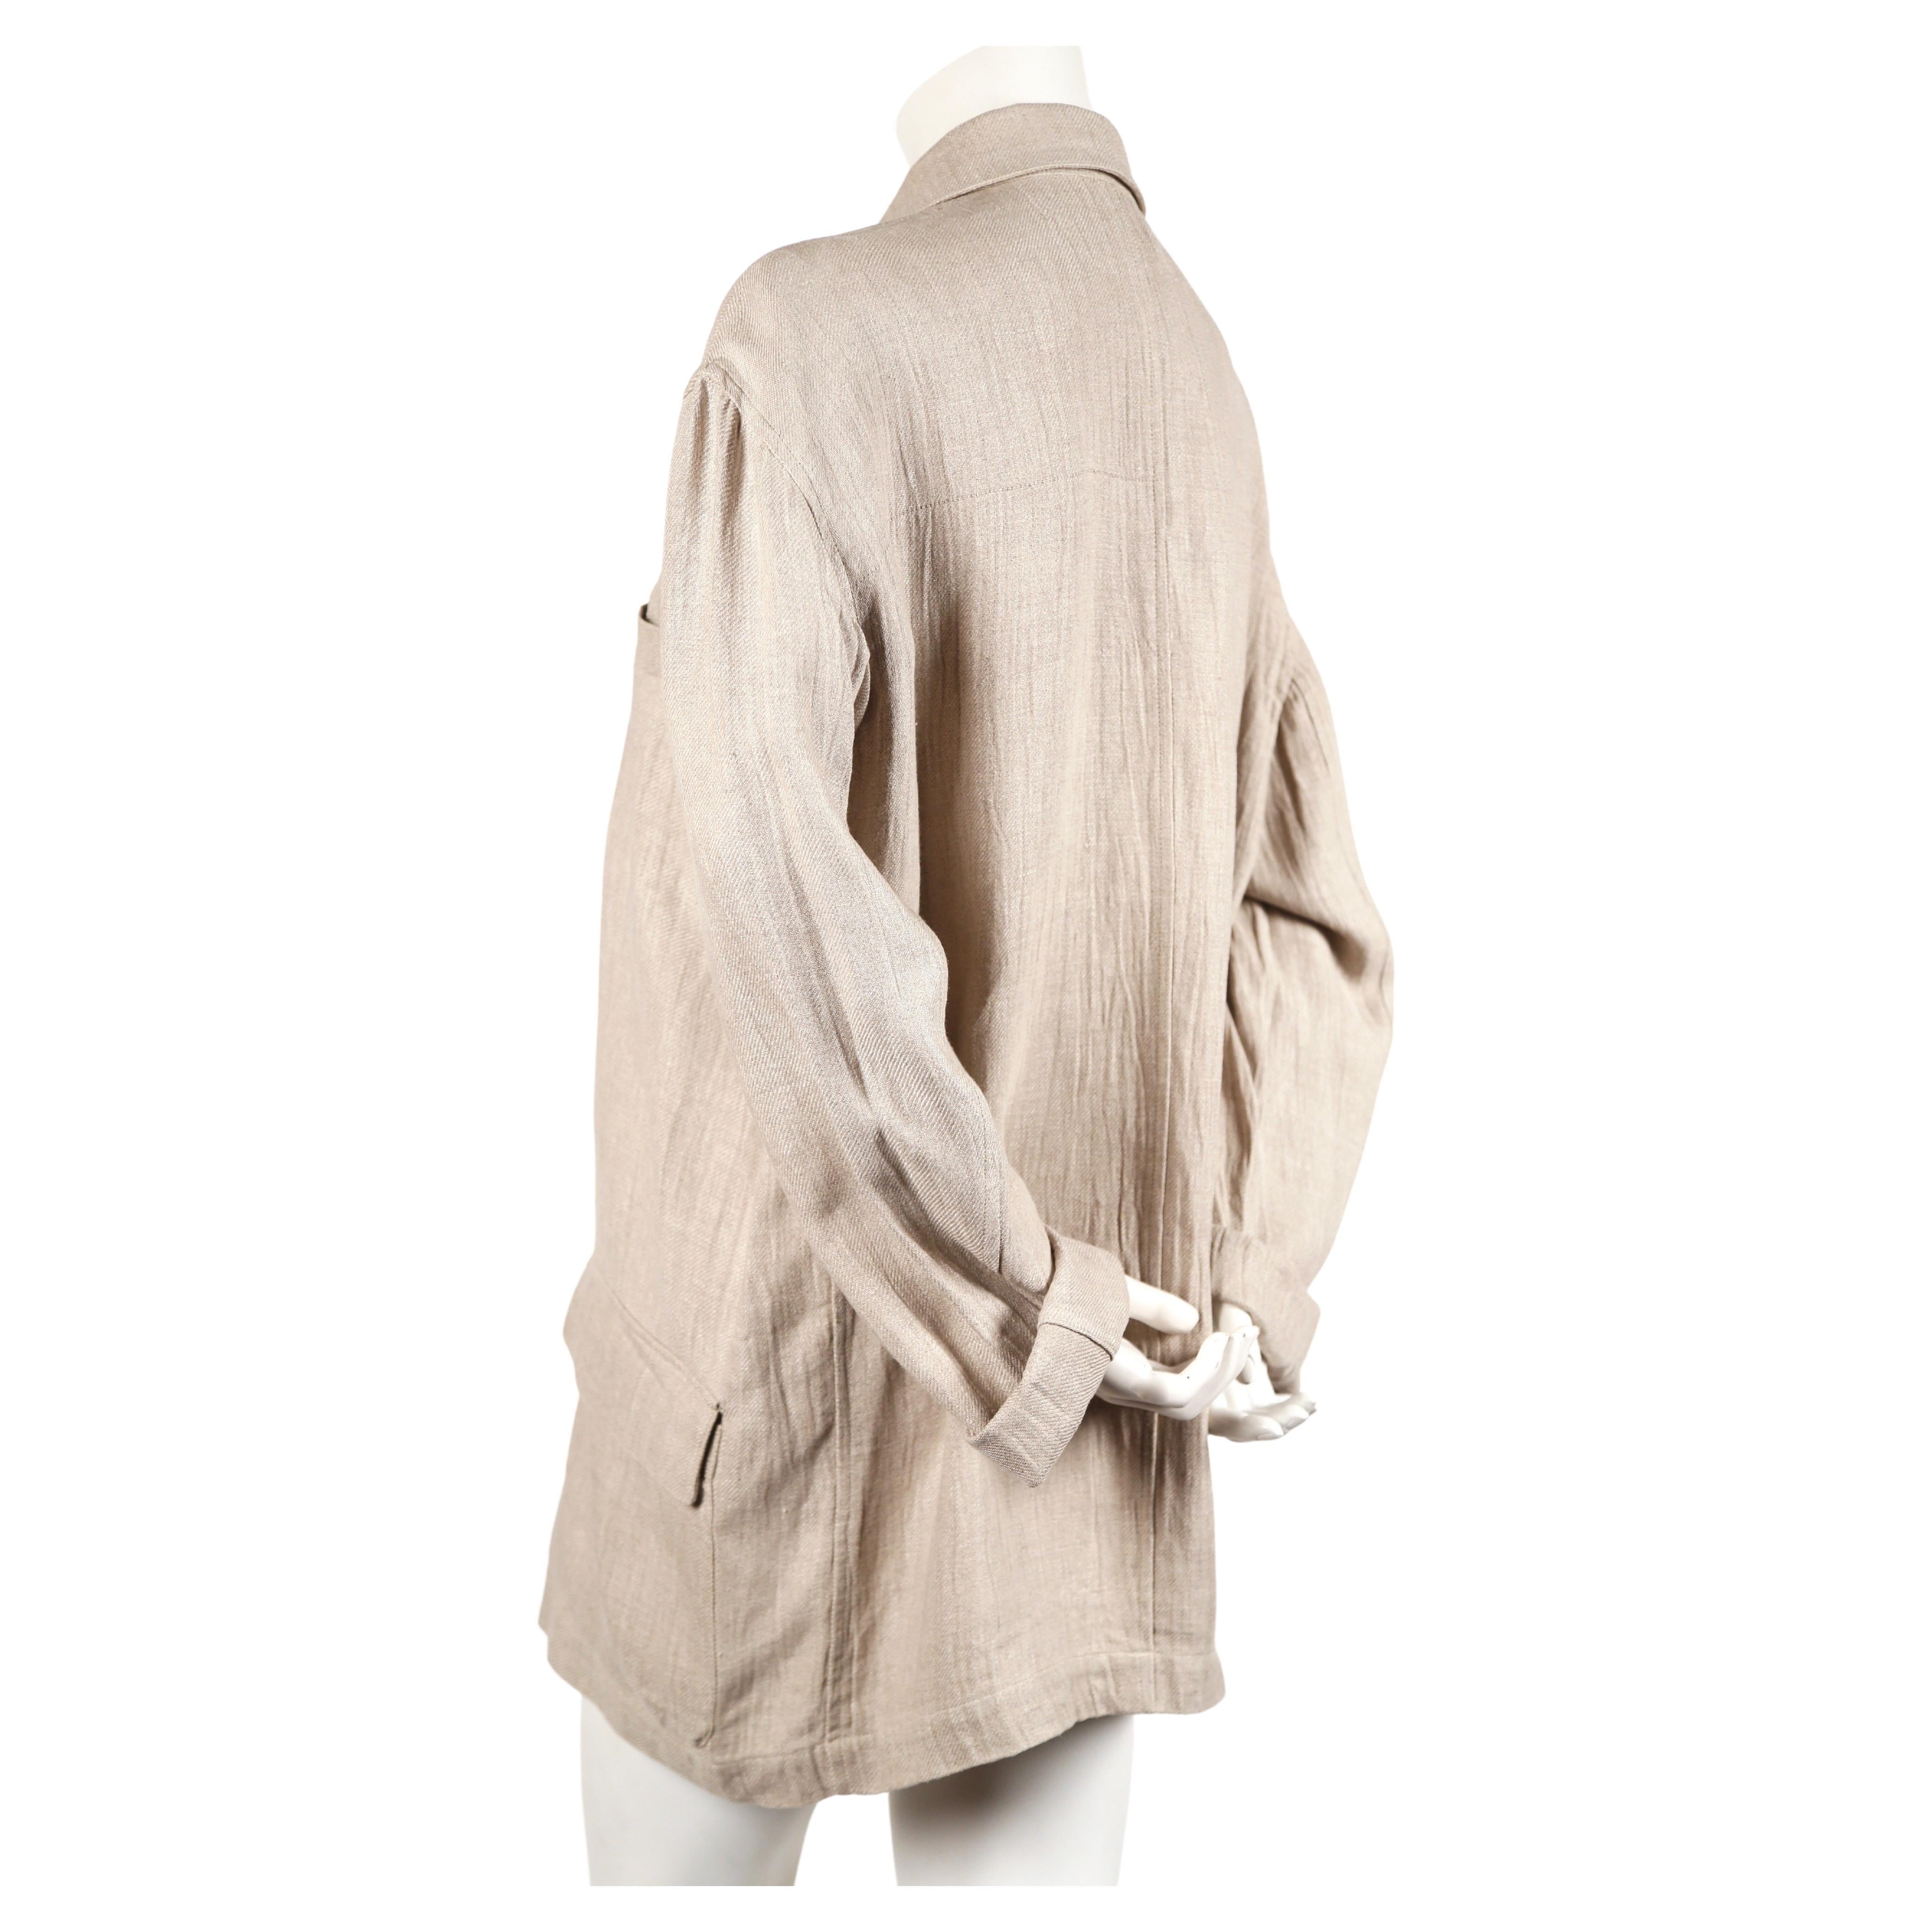 Beige 1980's ISSEY MIYAKE PLANTATION linen jacket with knotted fabric buttons